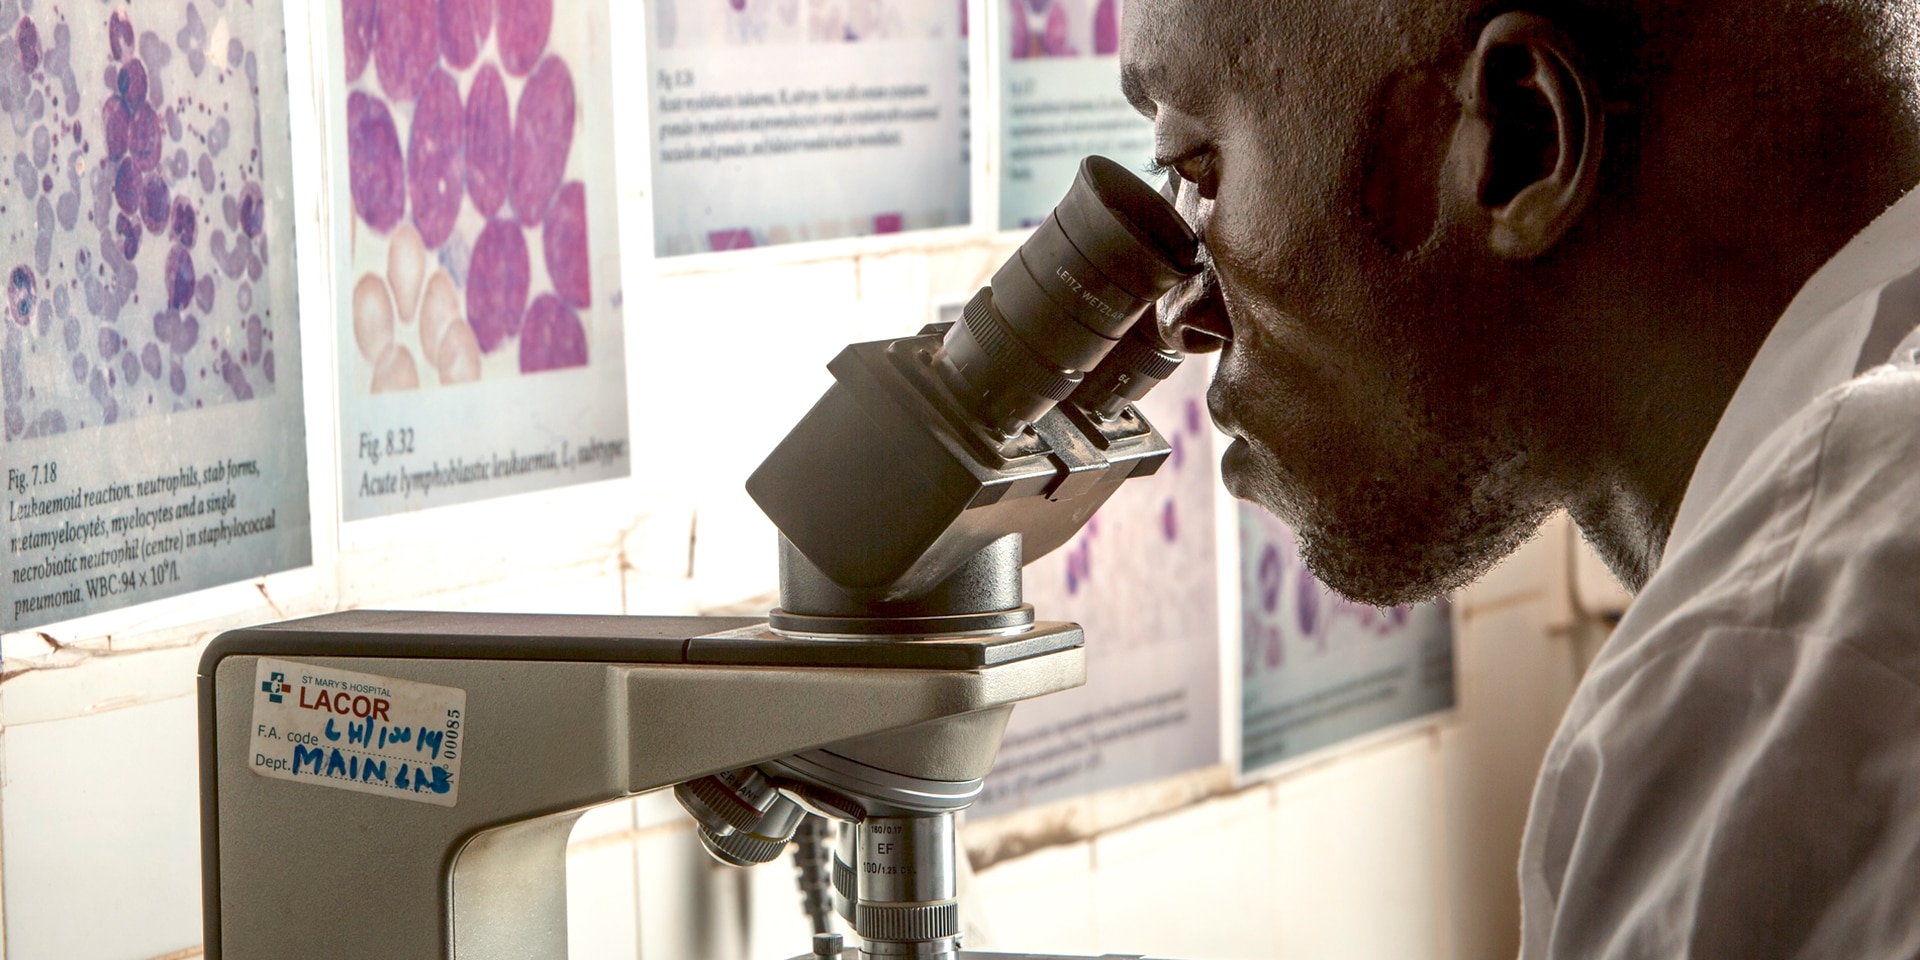  An employee in a hospital looks through a microscope. 